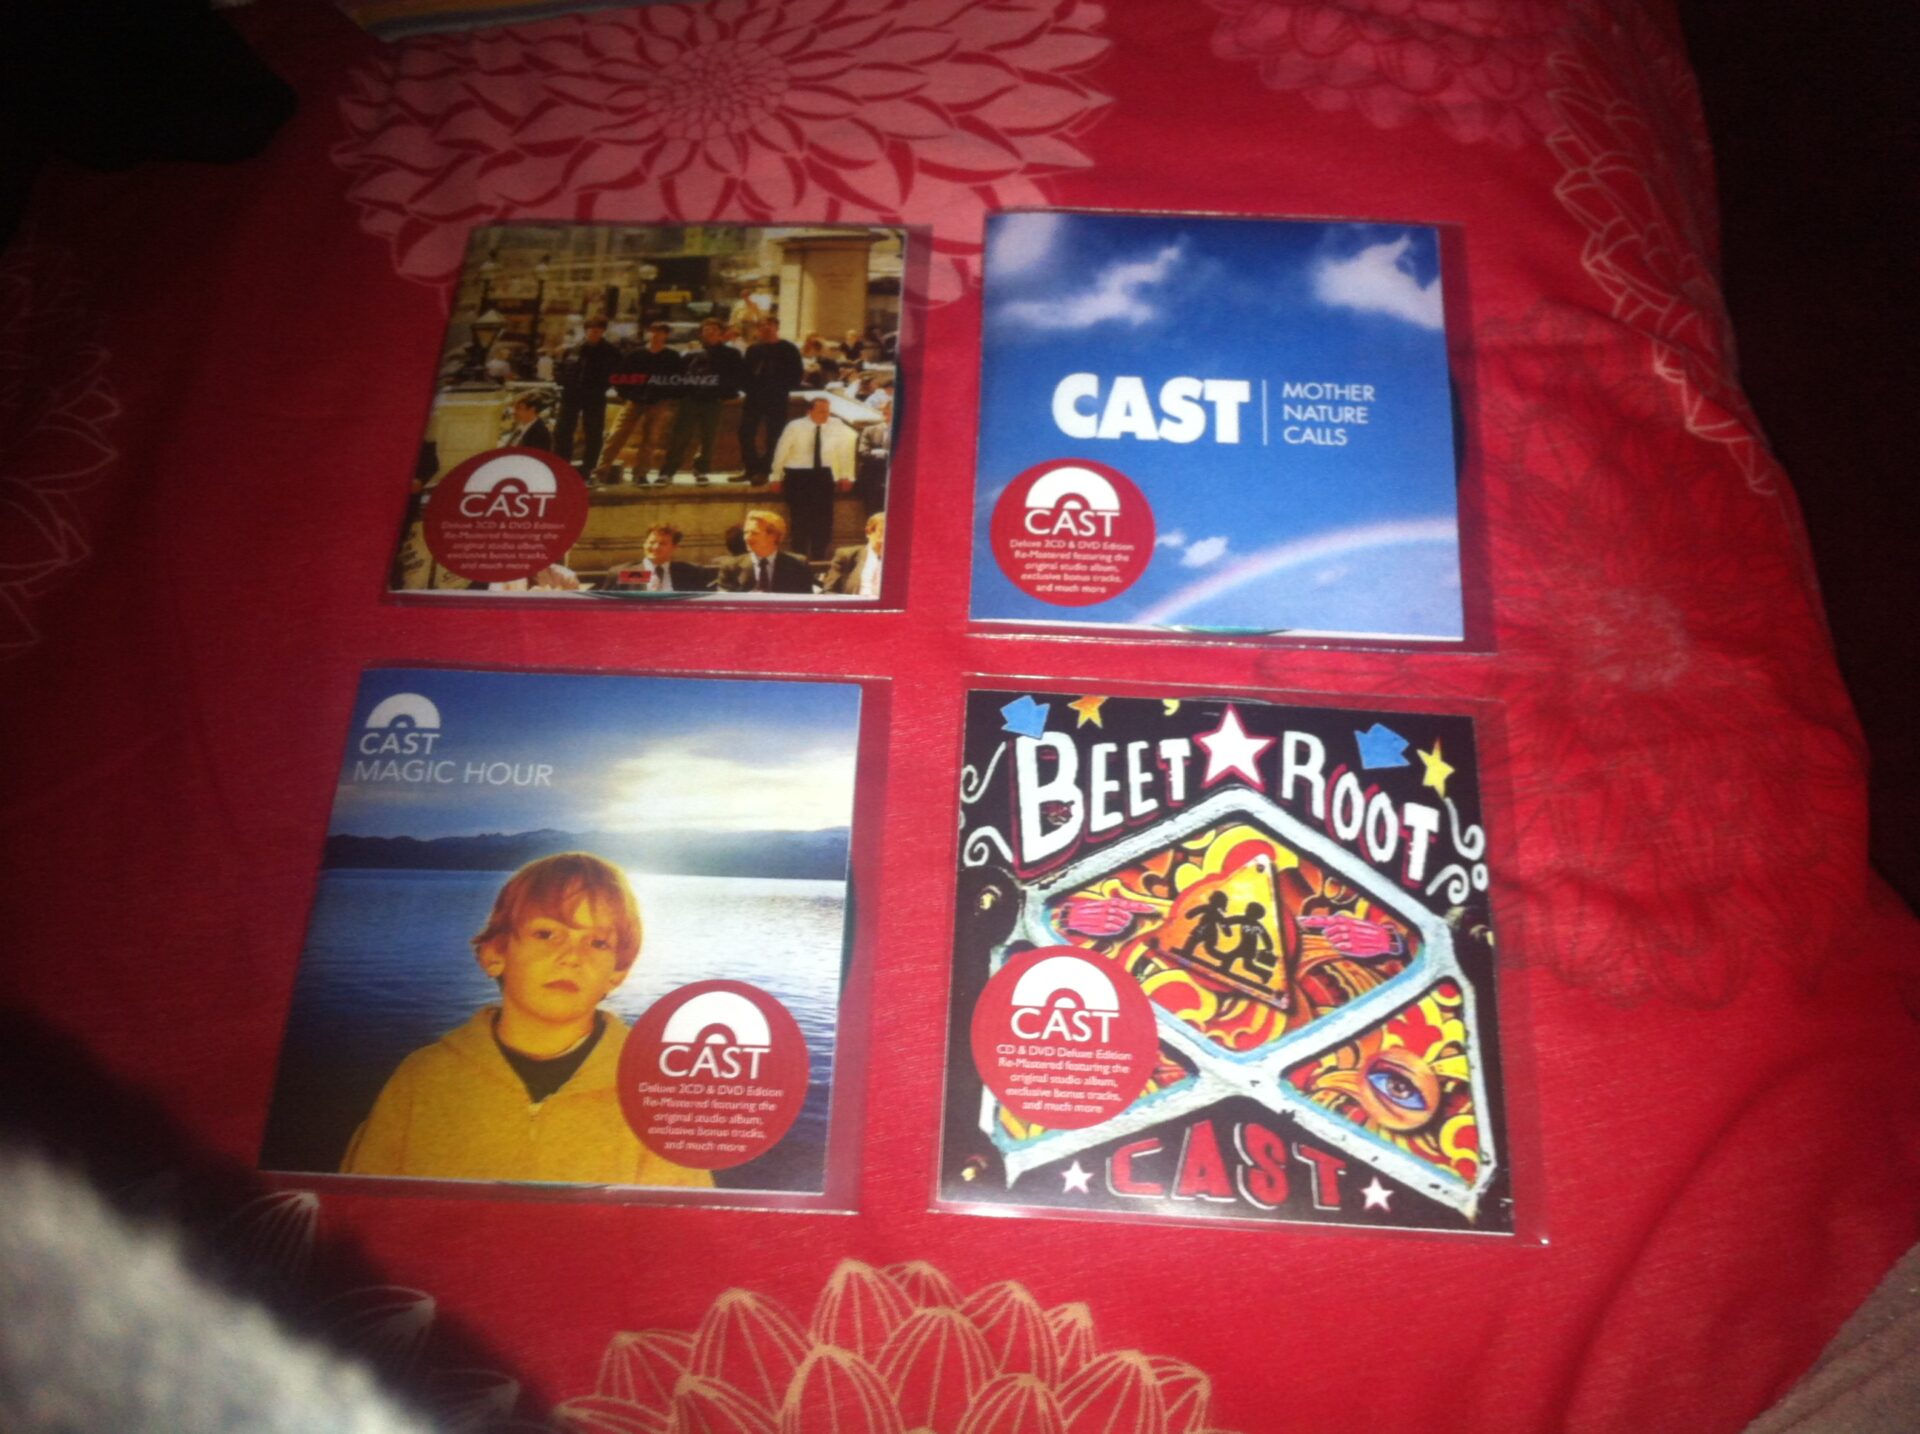 BritPop Month: Cast - Deluxe Editions: 'All Change'/'Mother Nature Calls'/'Magic Hour'/'Beetroot' (Edsel Records)